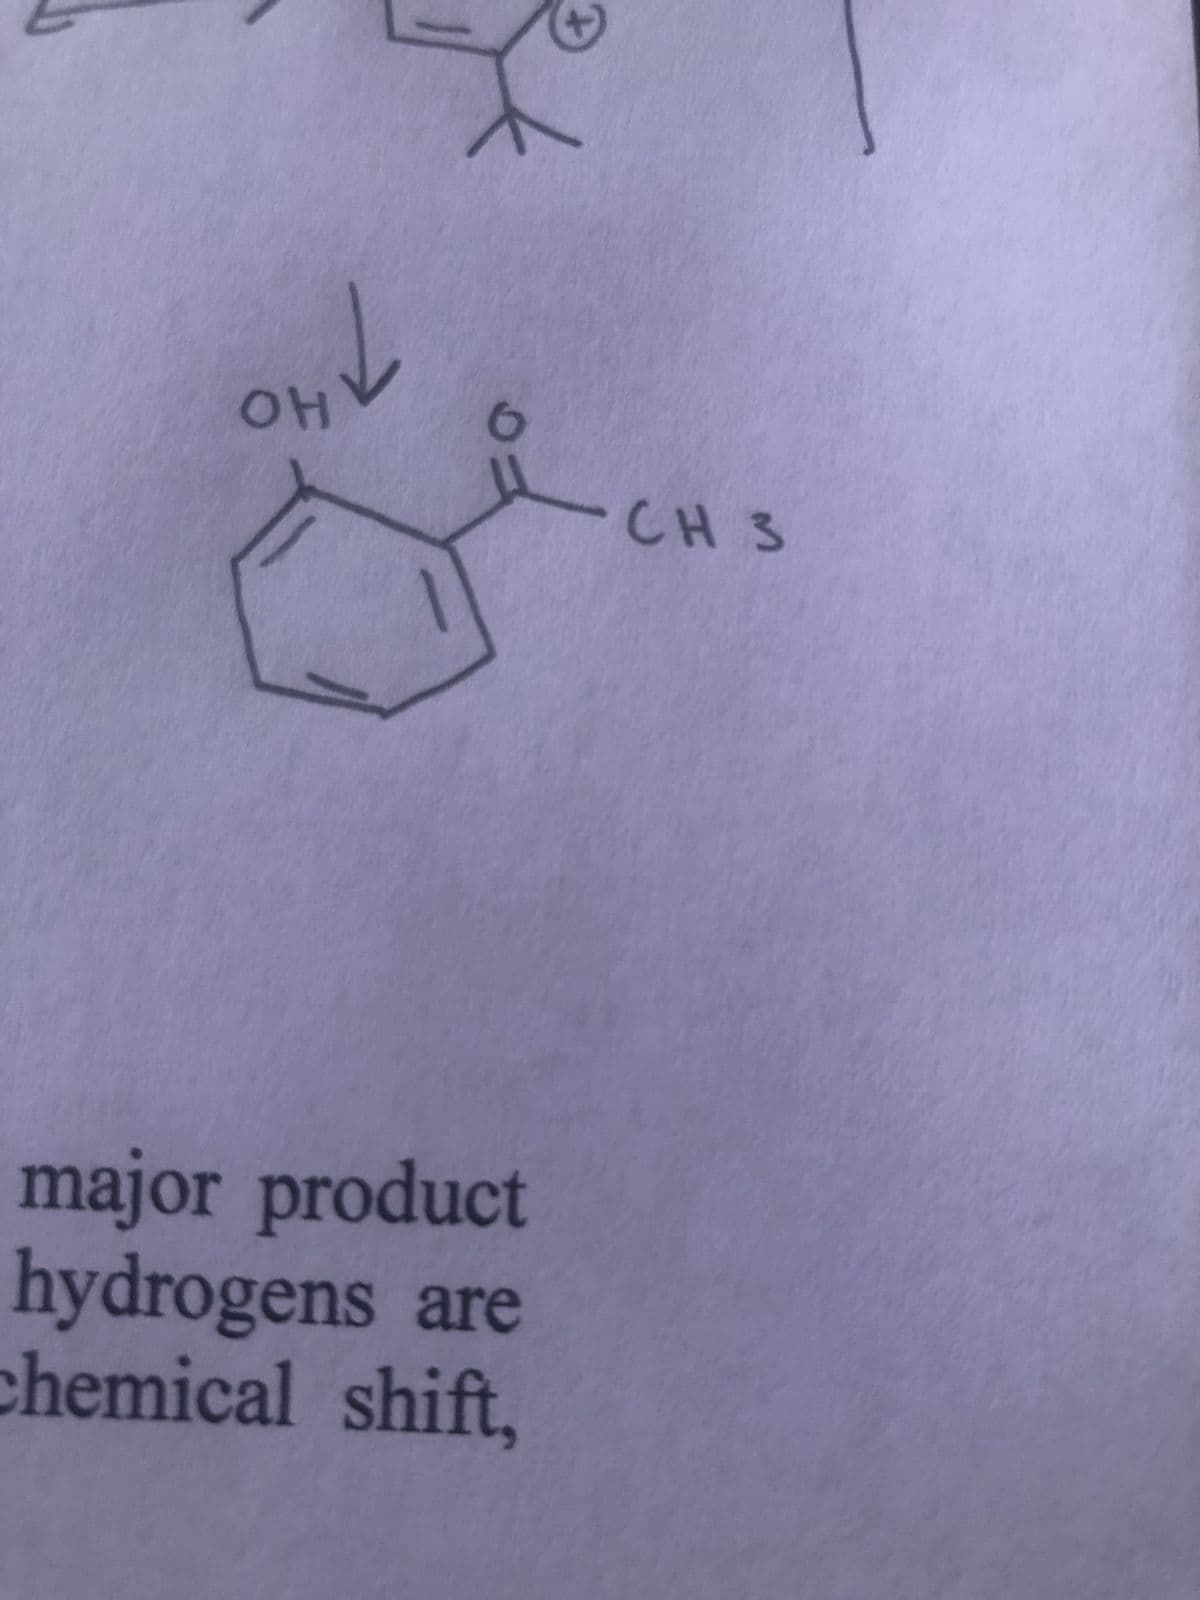 ↓
OH
6
major product
hydrogens are
chemical shift,
CH 3